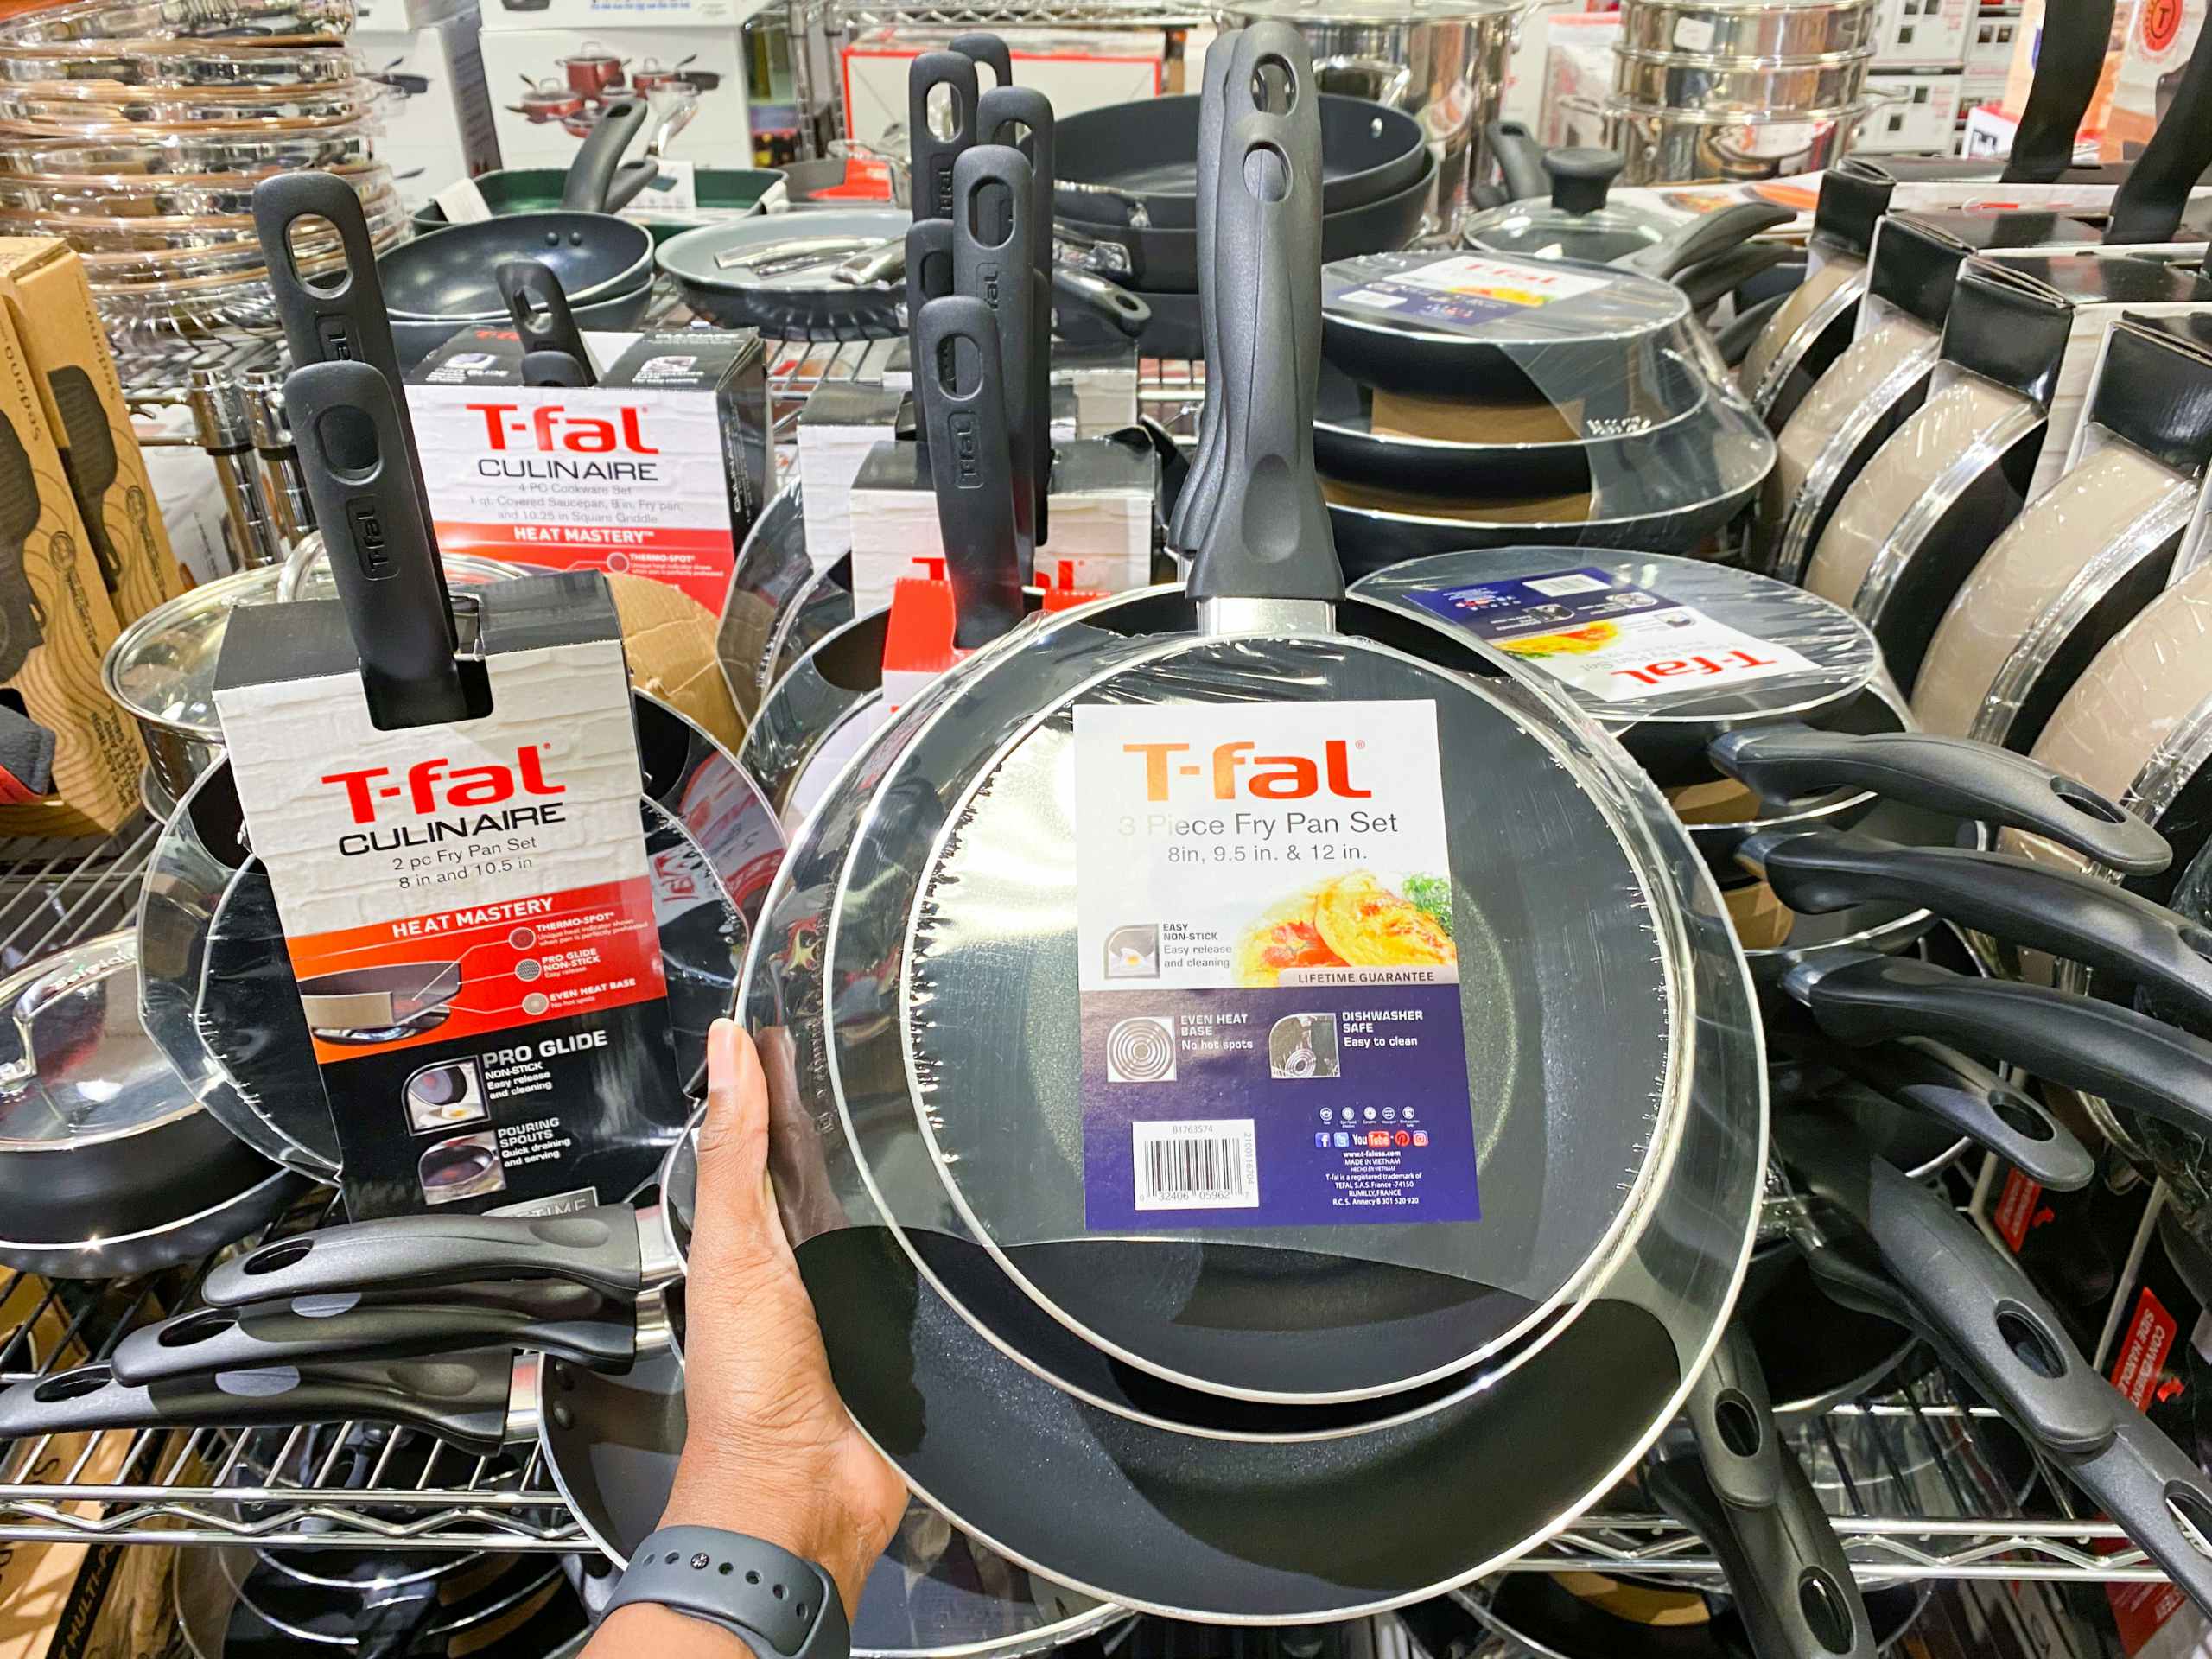 a t-fal frying pan set held up in front of a display of other pan sets in macys